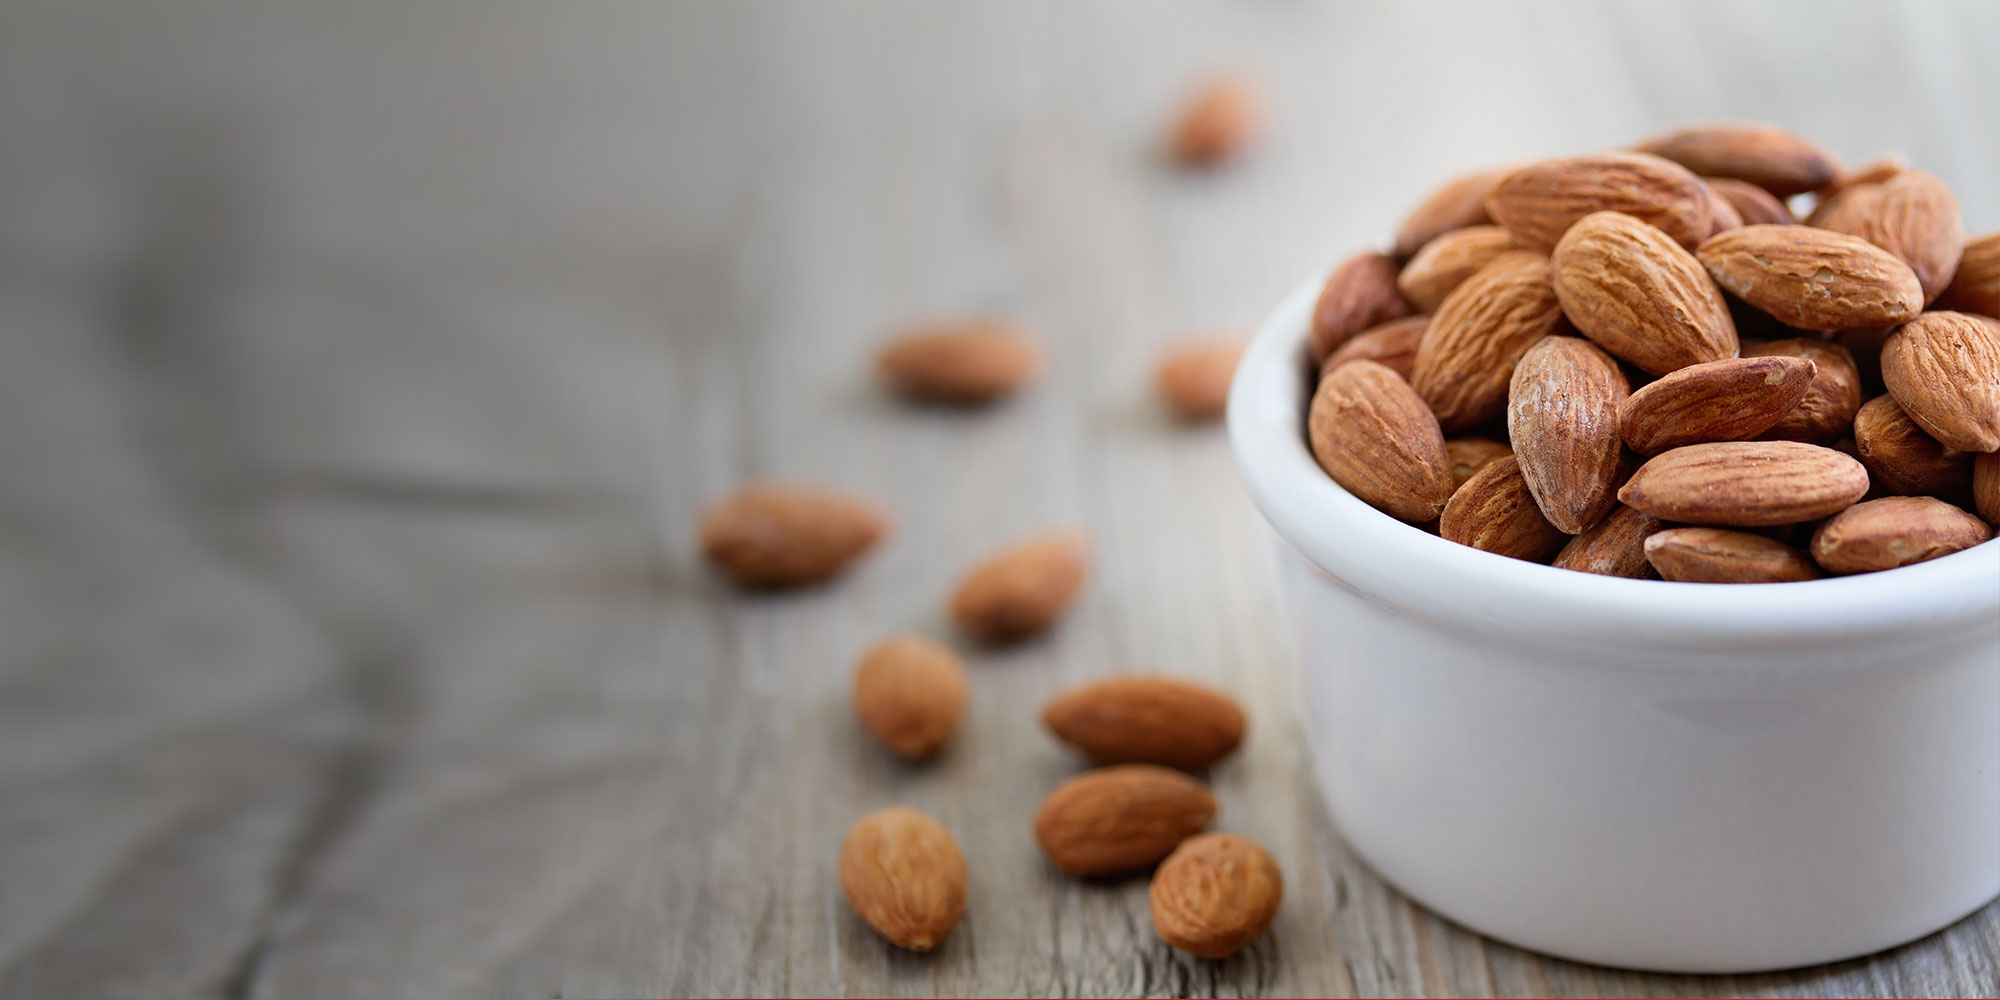 Healthy bowl of nutritious almonds